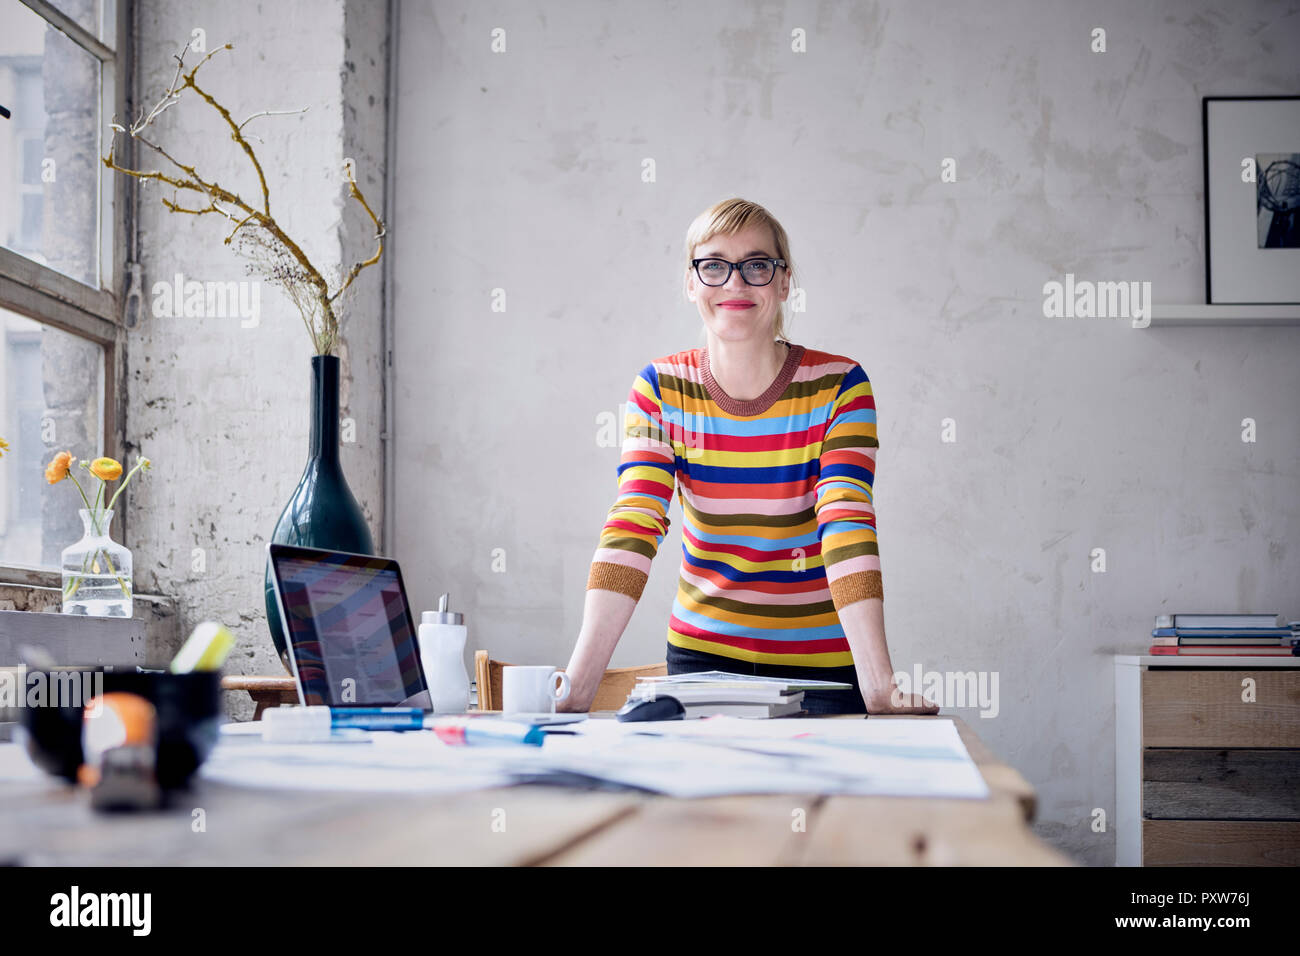 Portrait of smiling woman at desk in a loft Stock Photo